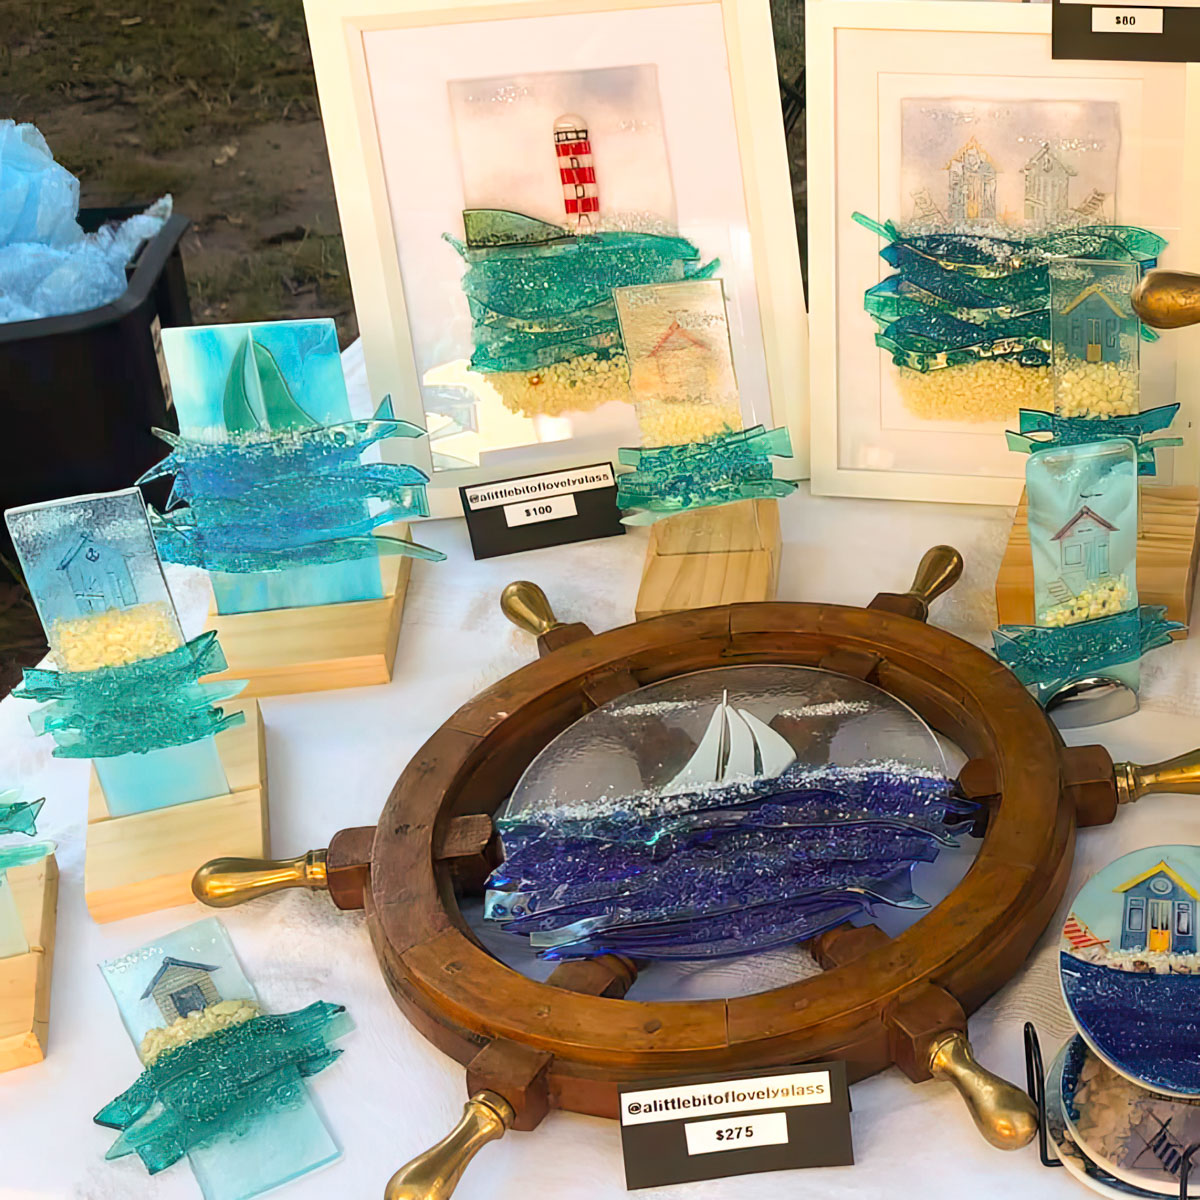 Glass artwork, boat scenes on a table - A little bit of lovely glass